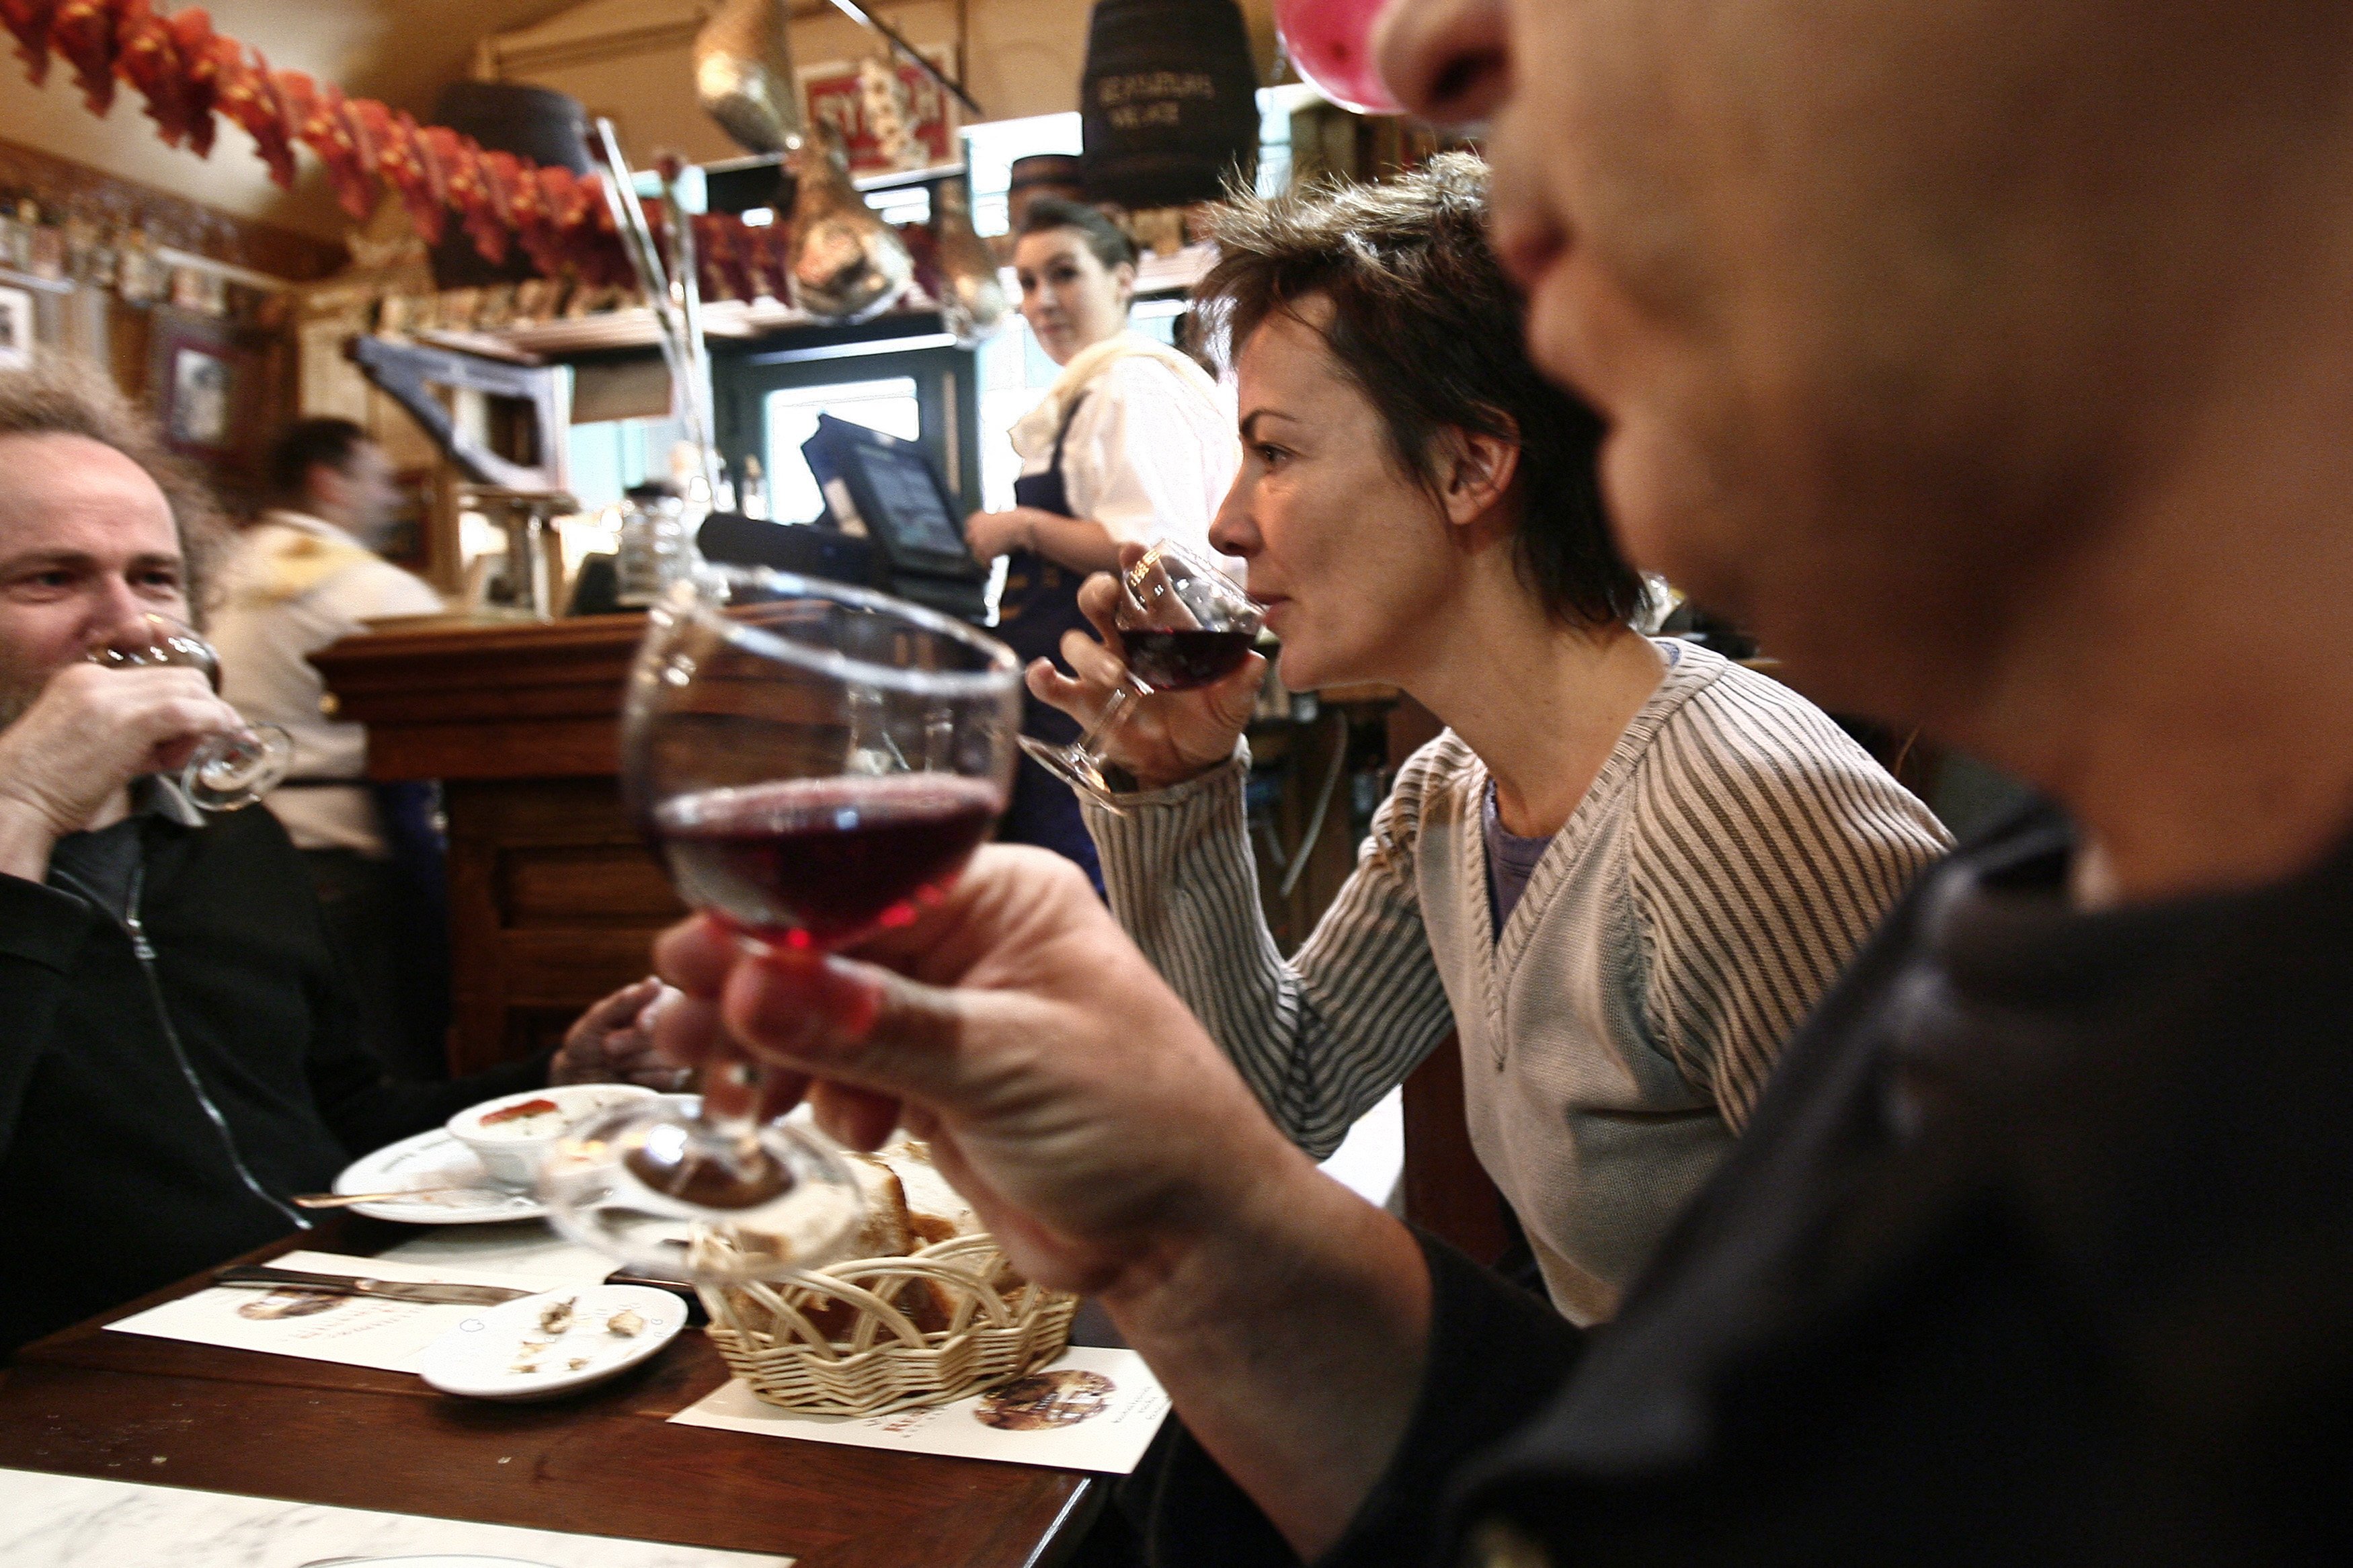 New research suggests all alcohol is harmful when consumed in any amount, contradicting other health advice that red wine can help reduce cardiovascular risks and coronary diseases. Photo: AFP